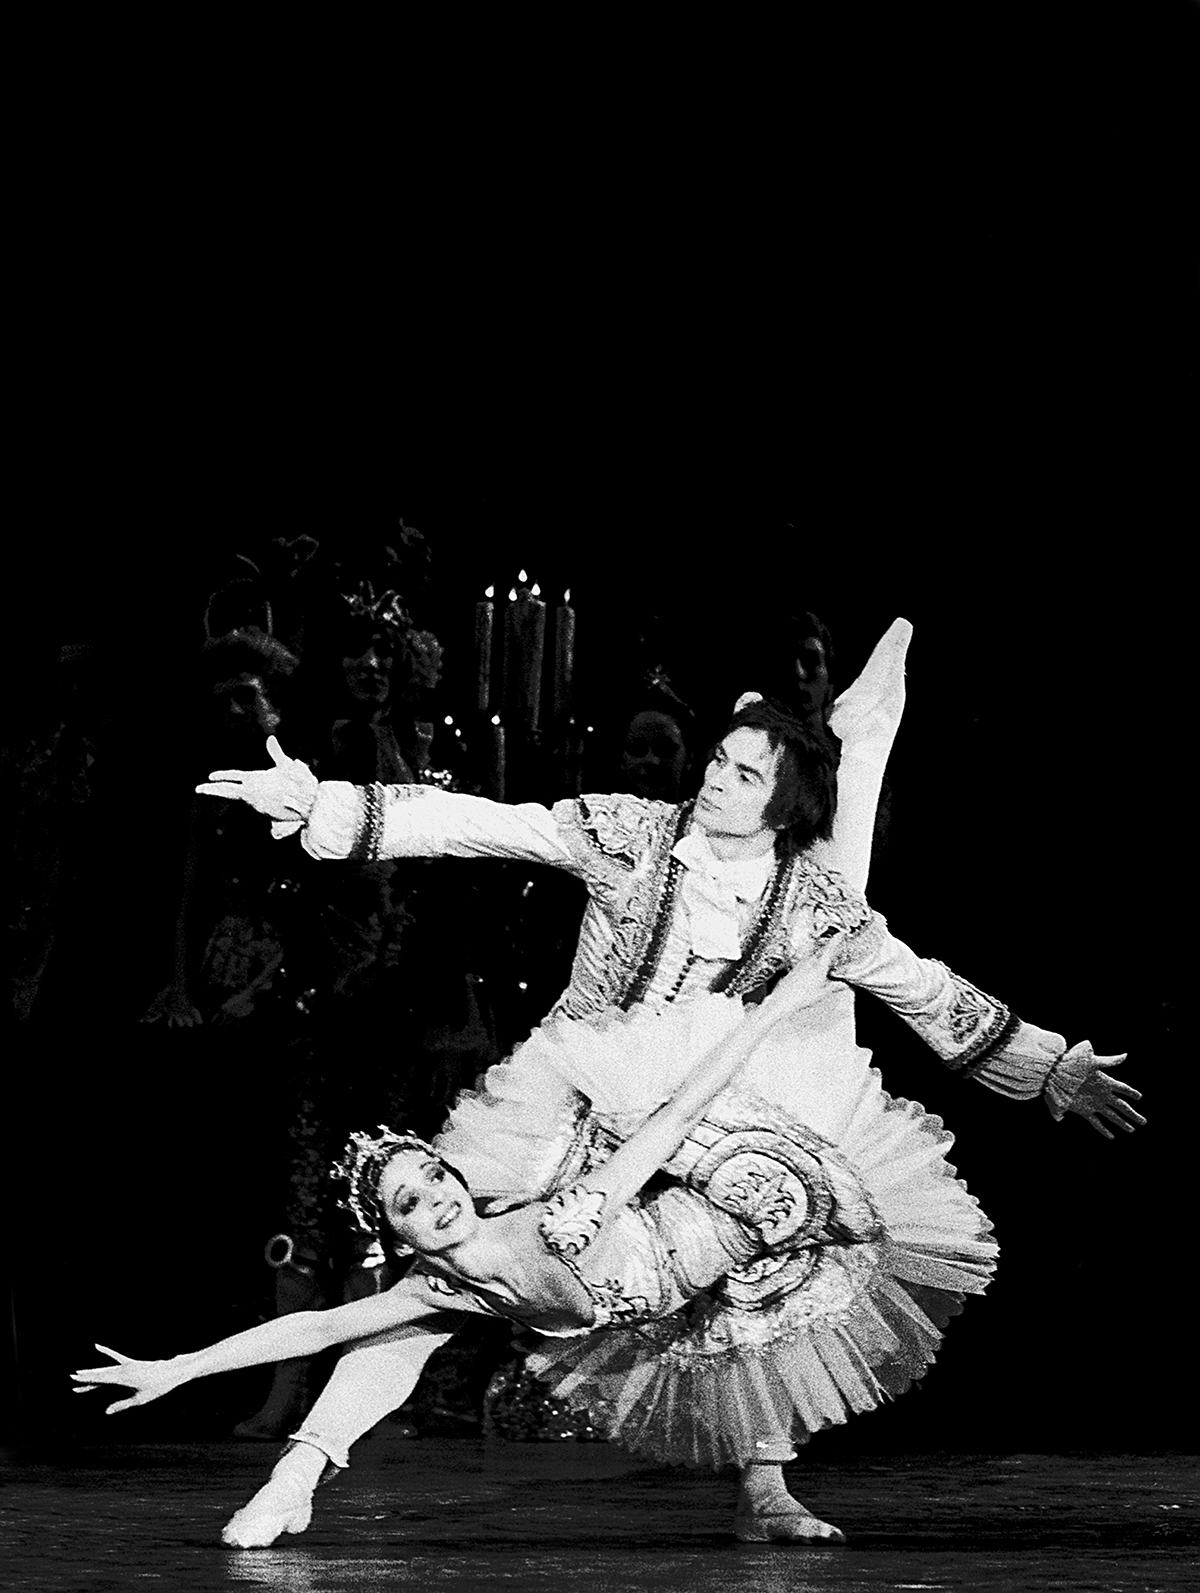 A black and white photo of ballerinas performing on a stage in costumes